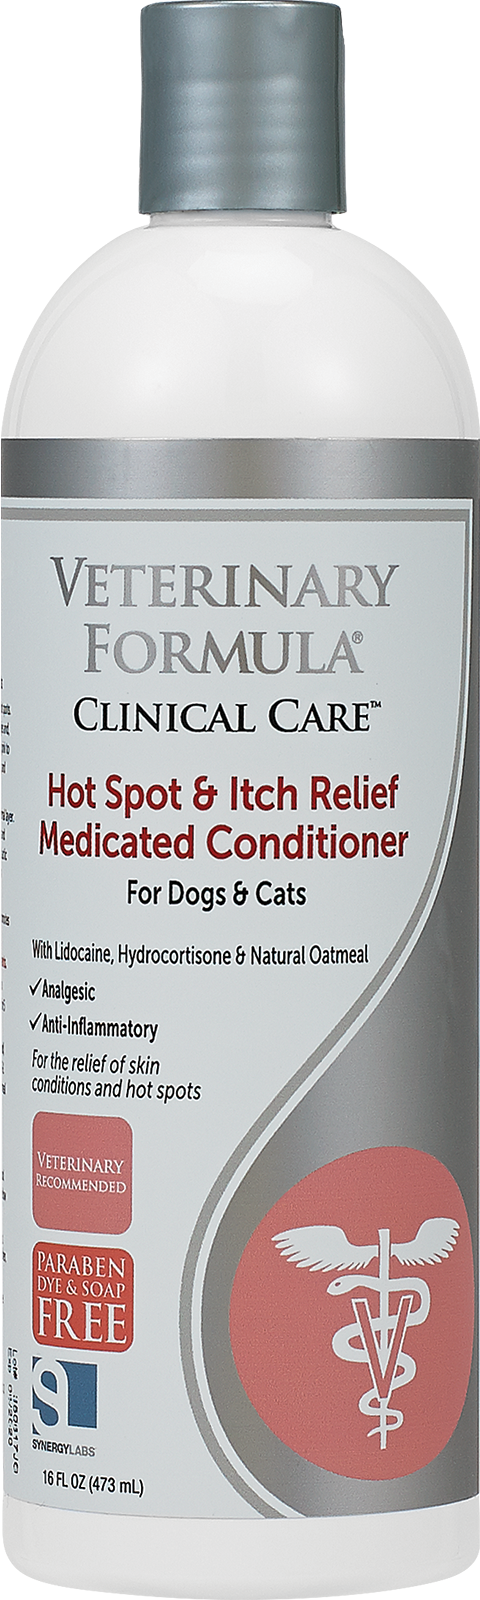 Synergy Labs Hot Spot & Itch Relief Medicated Conditioner for Dogs and Cats